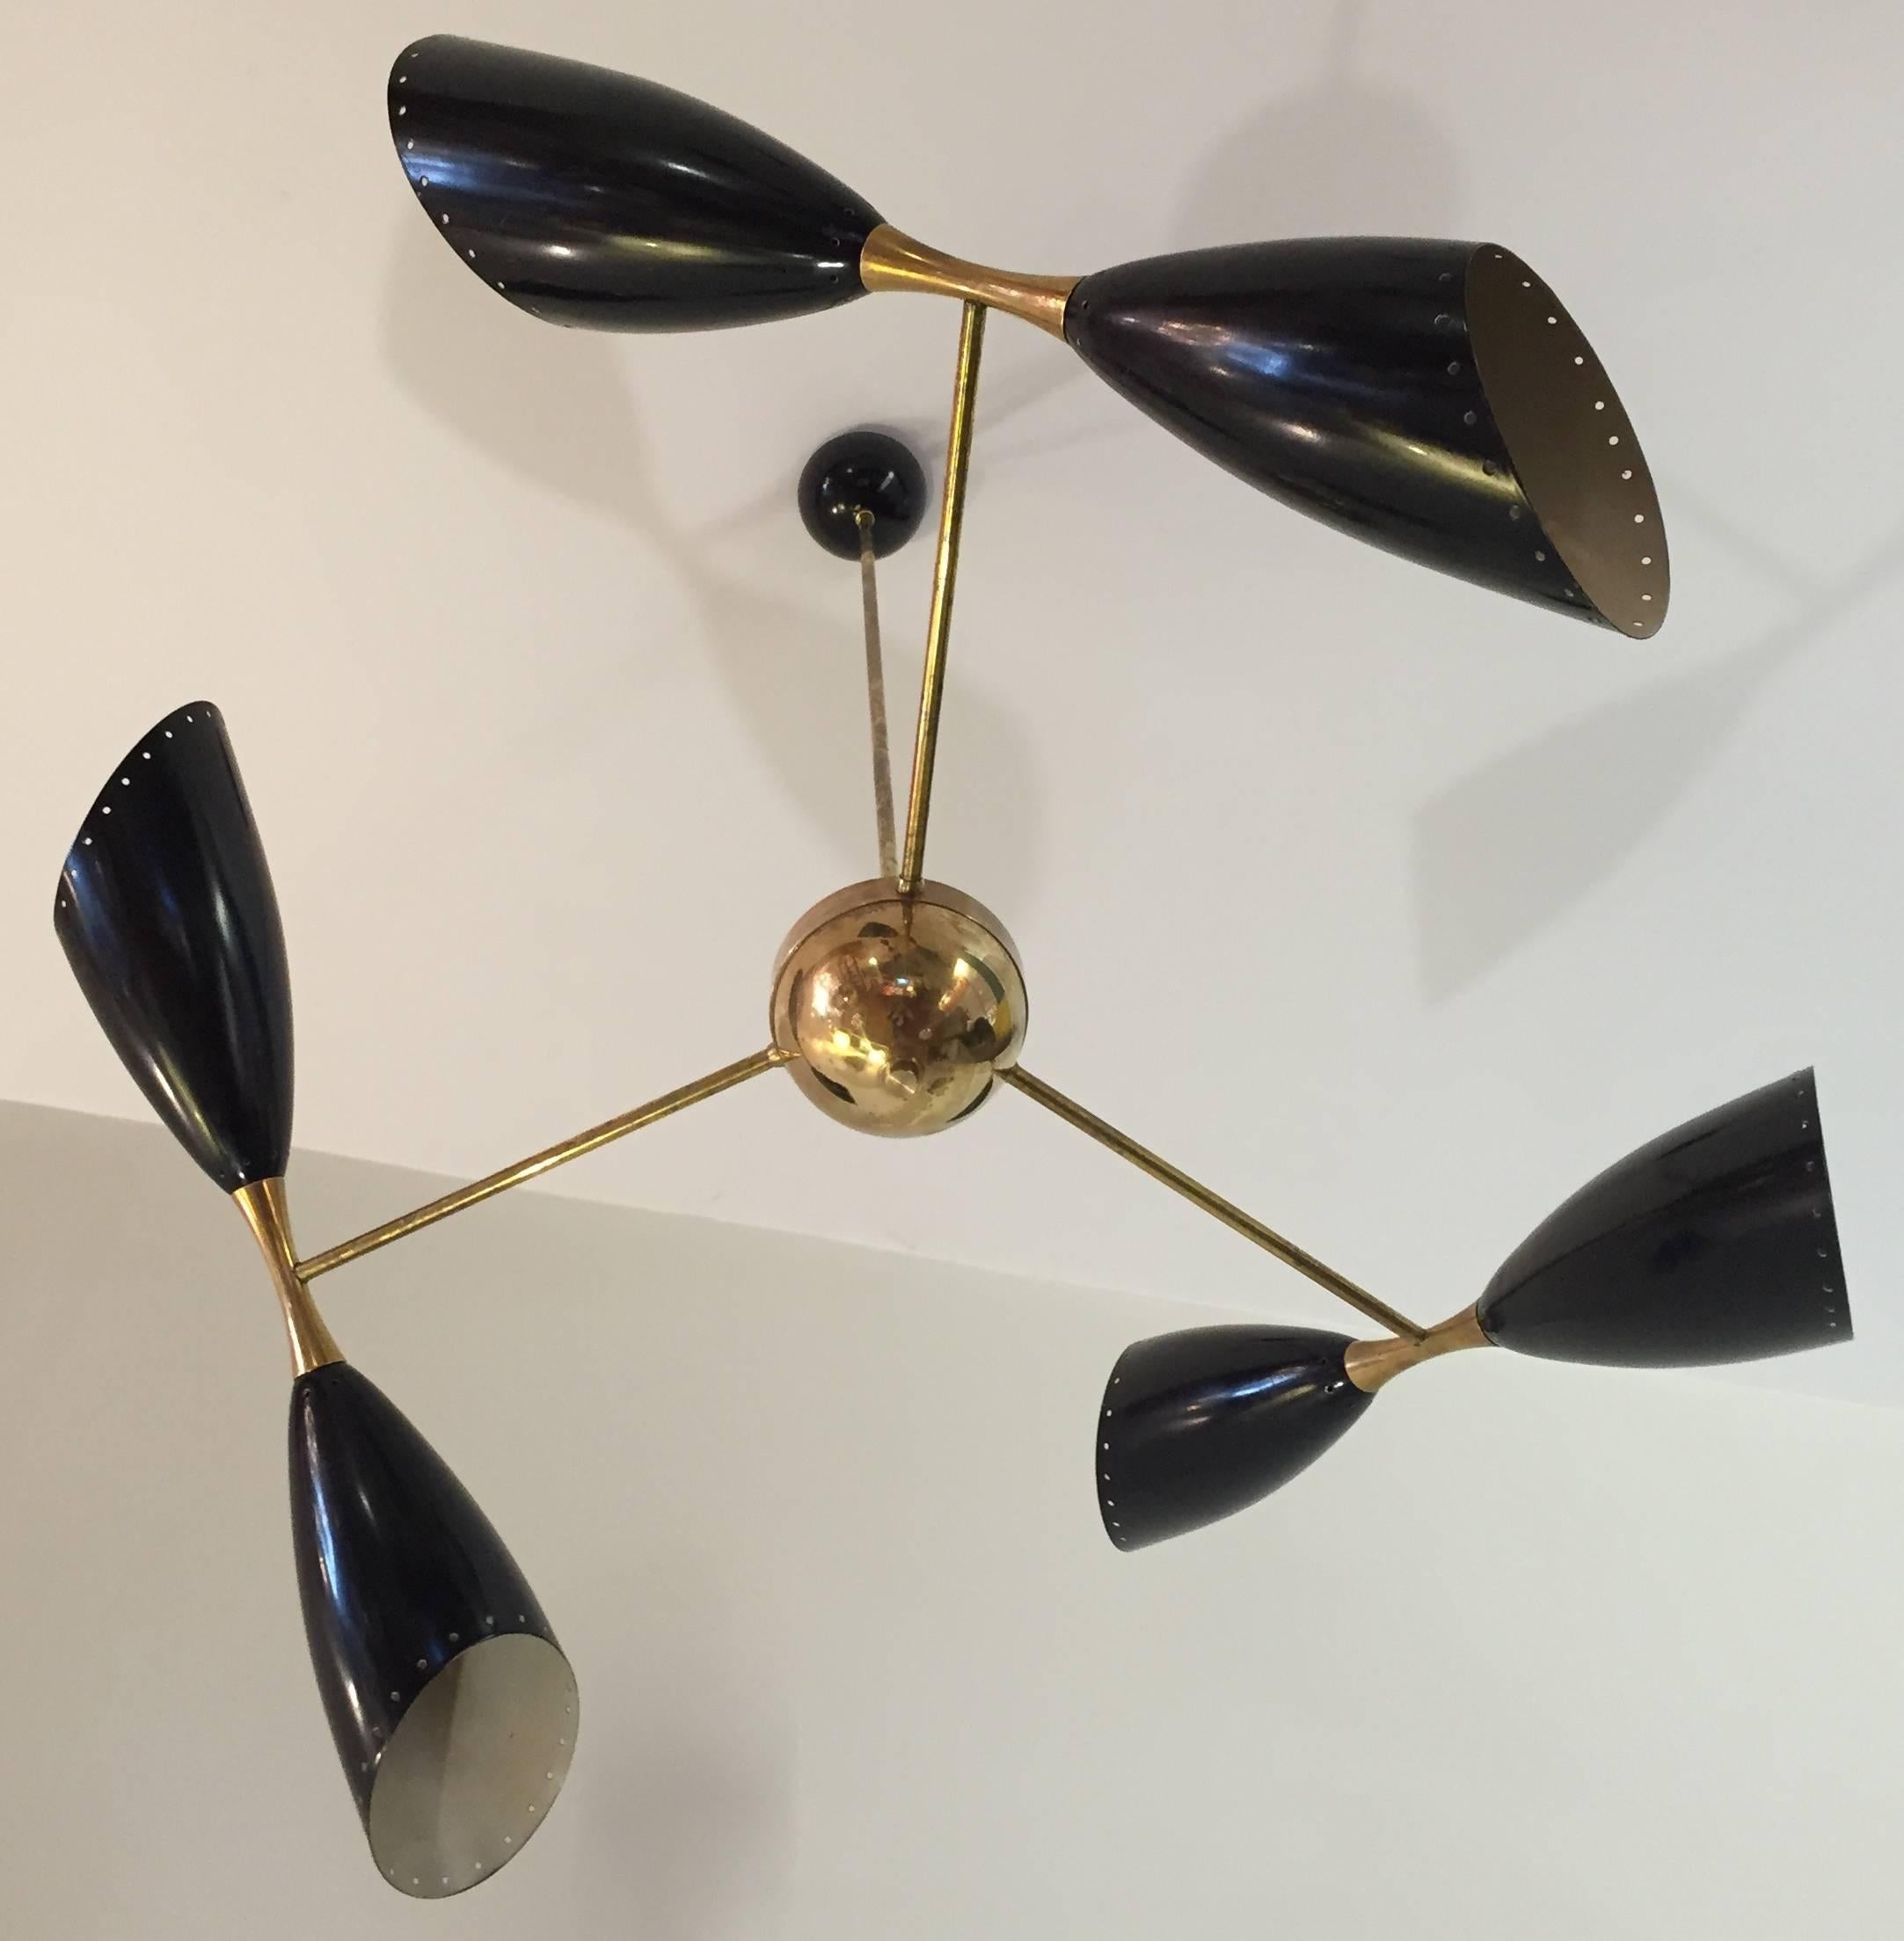 An outstanding Stilnovo style chandeliers. Three aluminum double diabolo shaped shades (60 cm) in enameled black with brass hardware and structure .Newly polished and rewired. Original condition.
Two in stock. Price is for item.